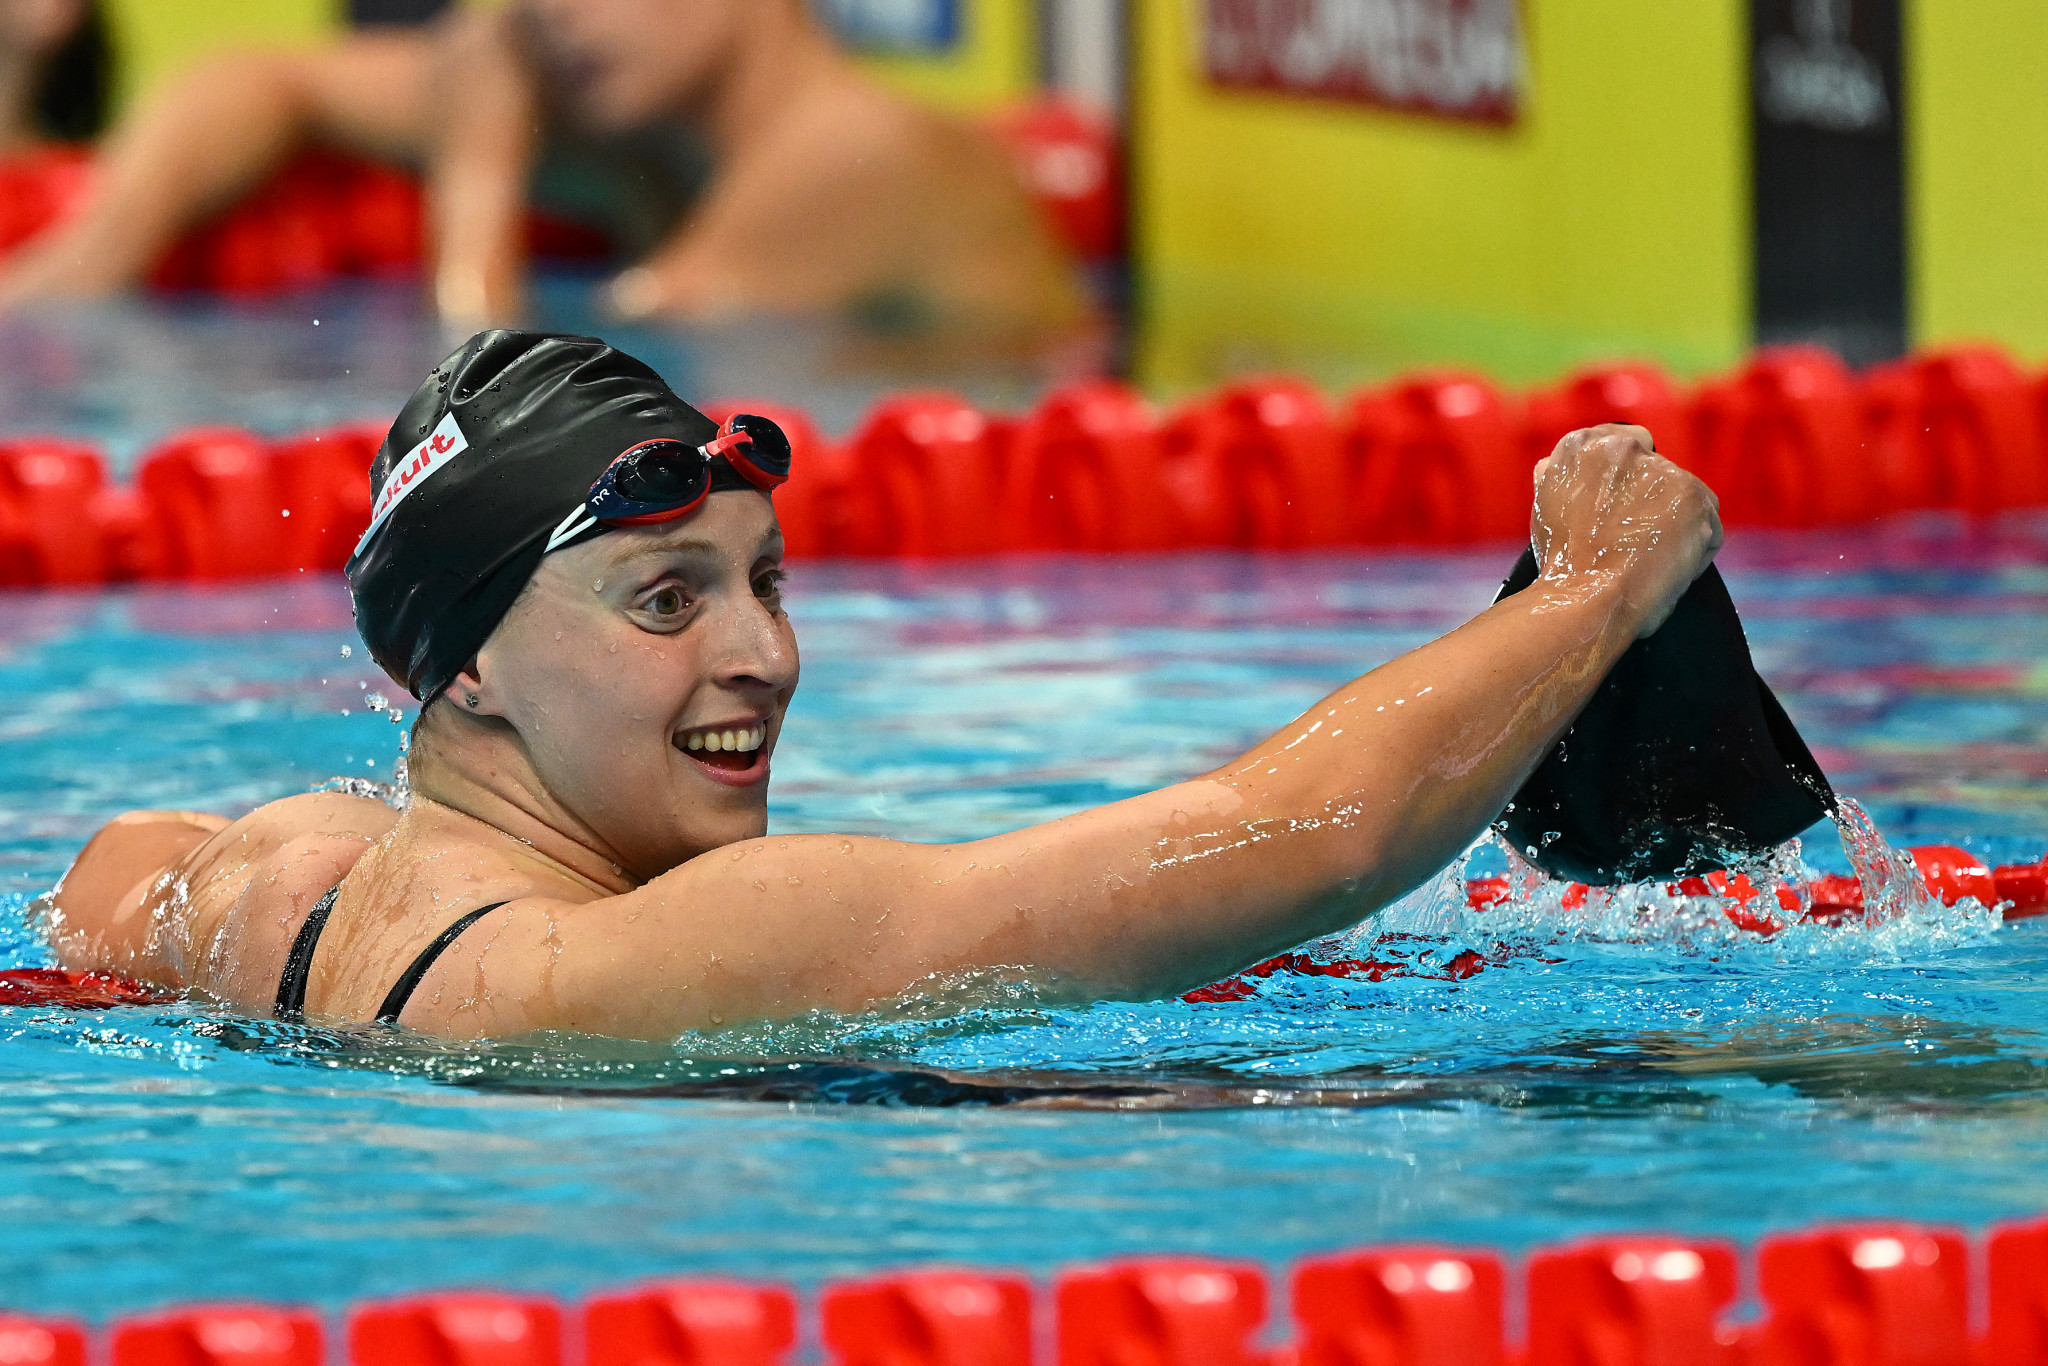 The United States' Katie Ledecky won her 16th FINA World Championships gold medal in the women's 400m freestyle ©Getty Images